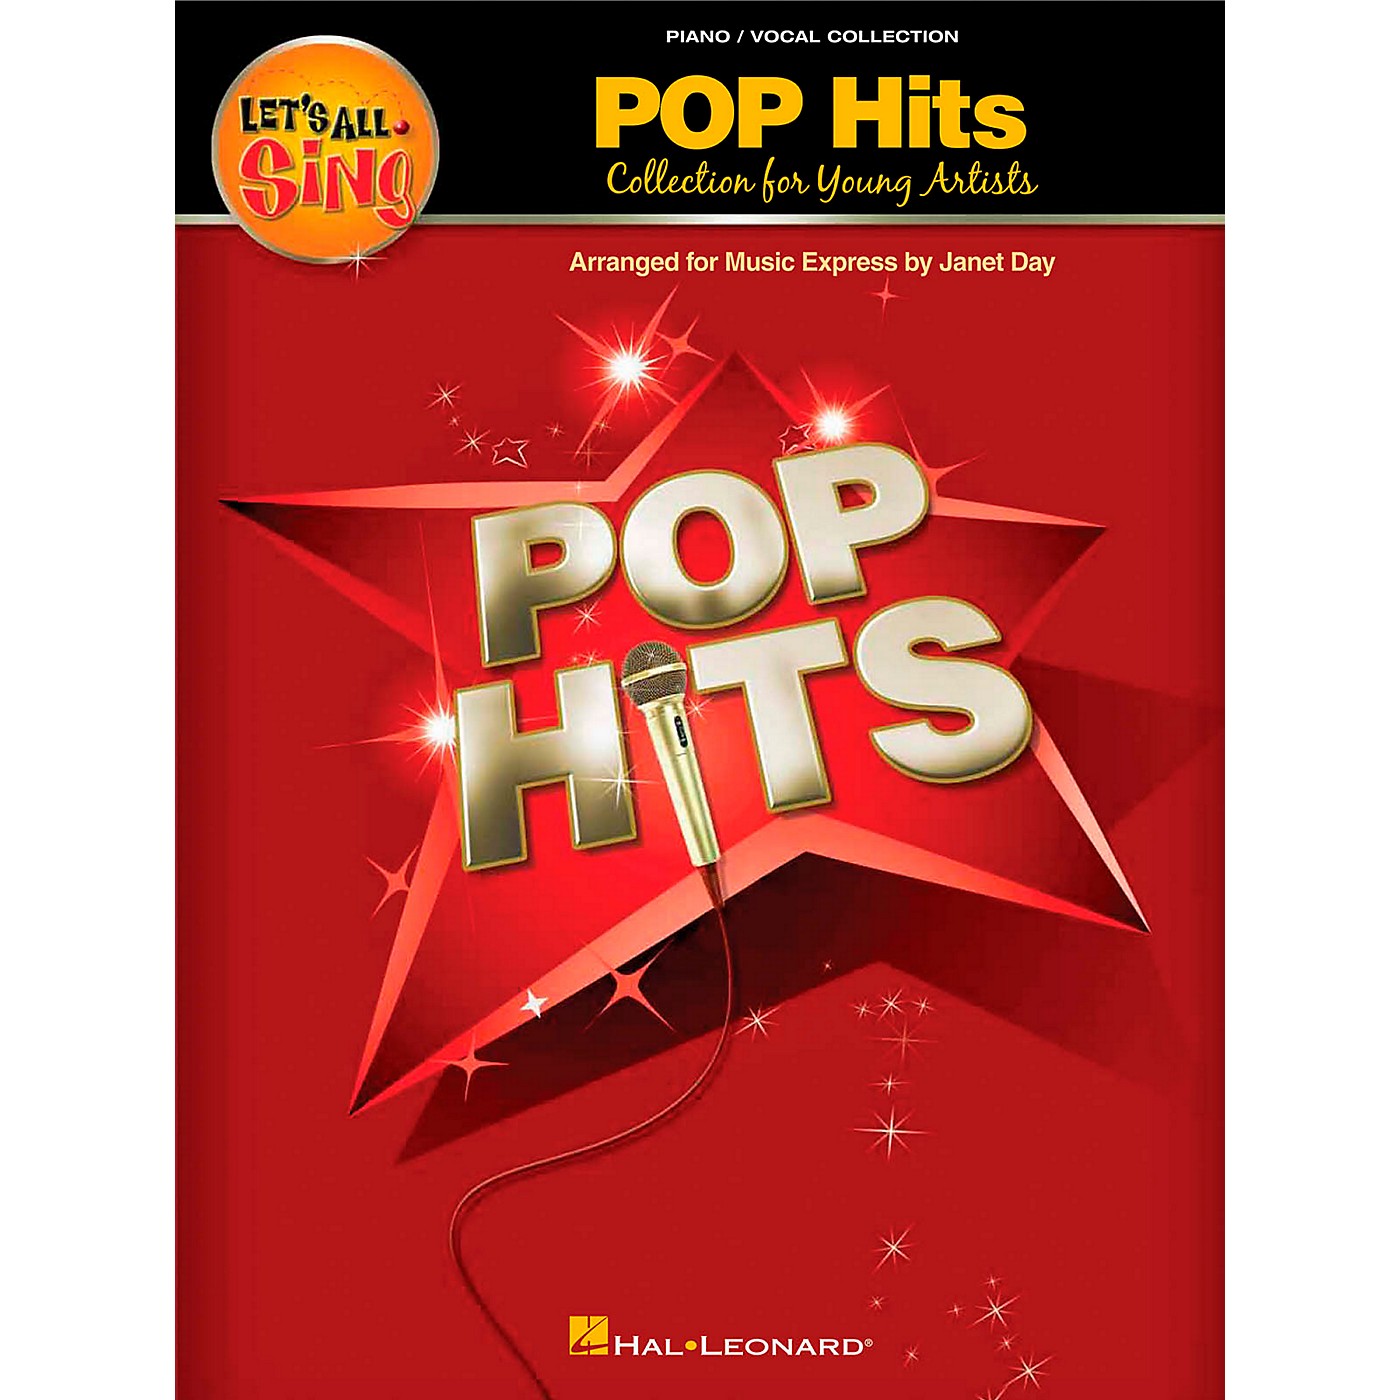 Hal Leonard Let's All Sing Pop Hits - Collection for Young Voices Performance/Accompaniment CD thumbnail